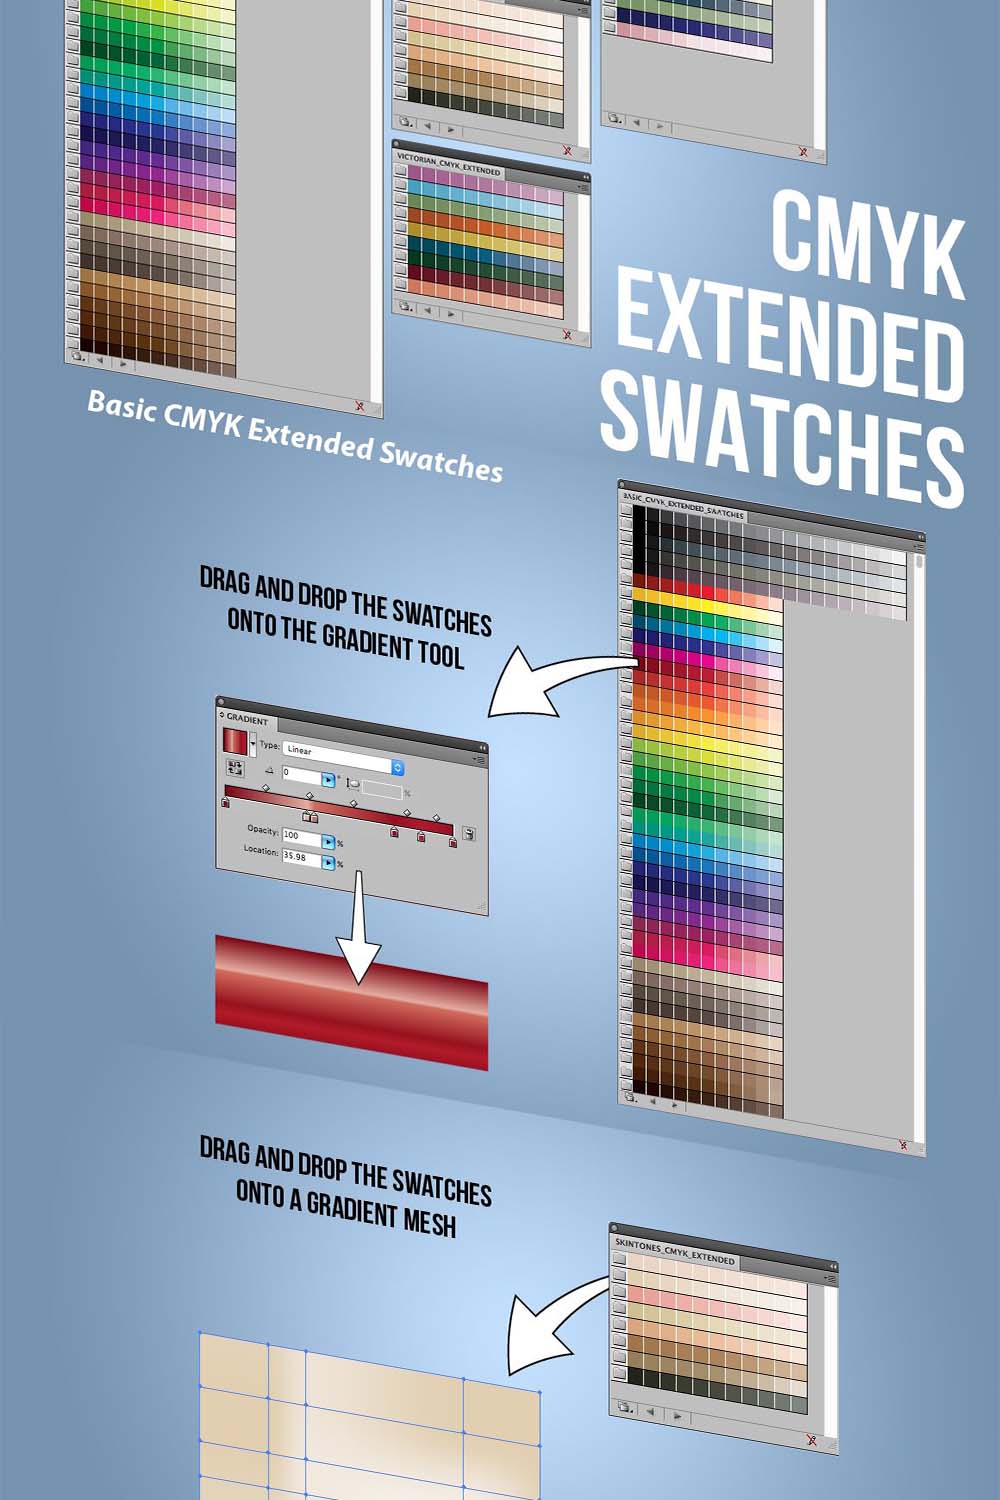 CMYK Extended Swatches Pinterest image.